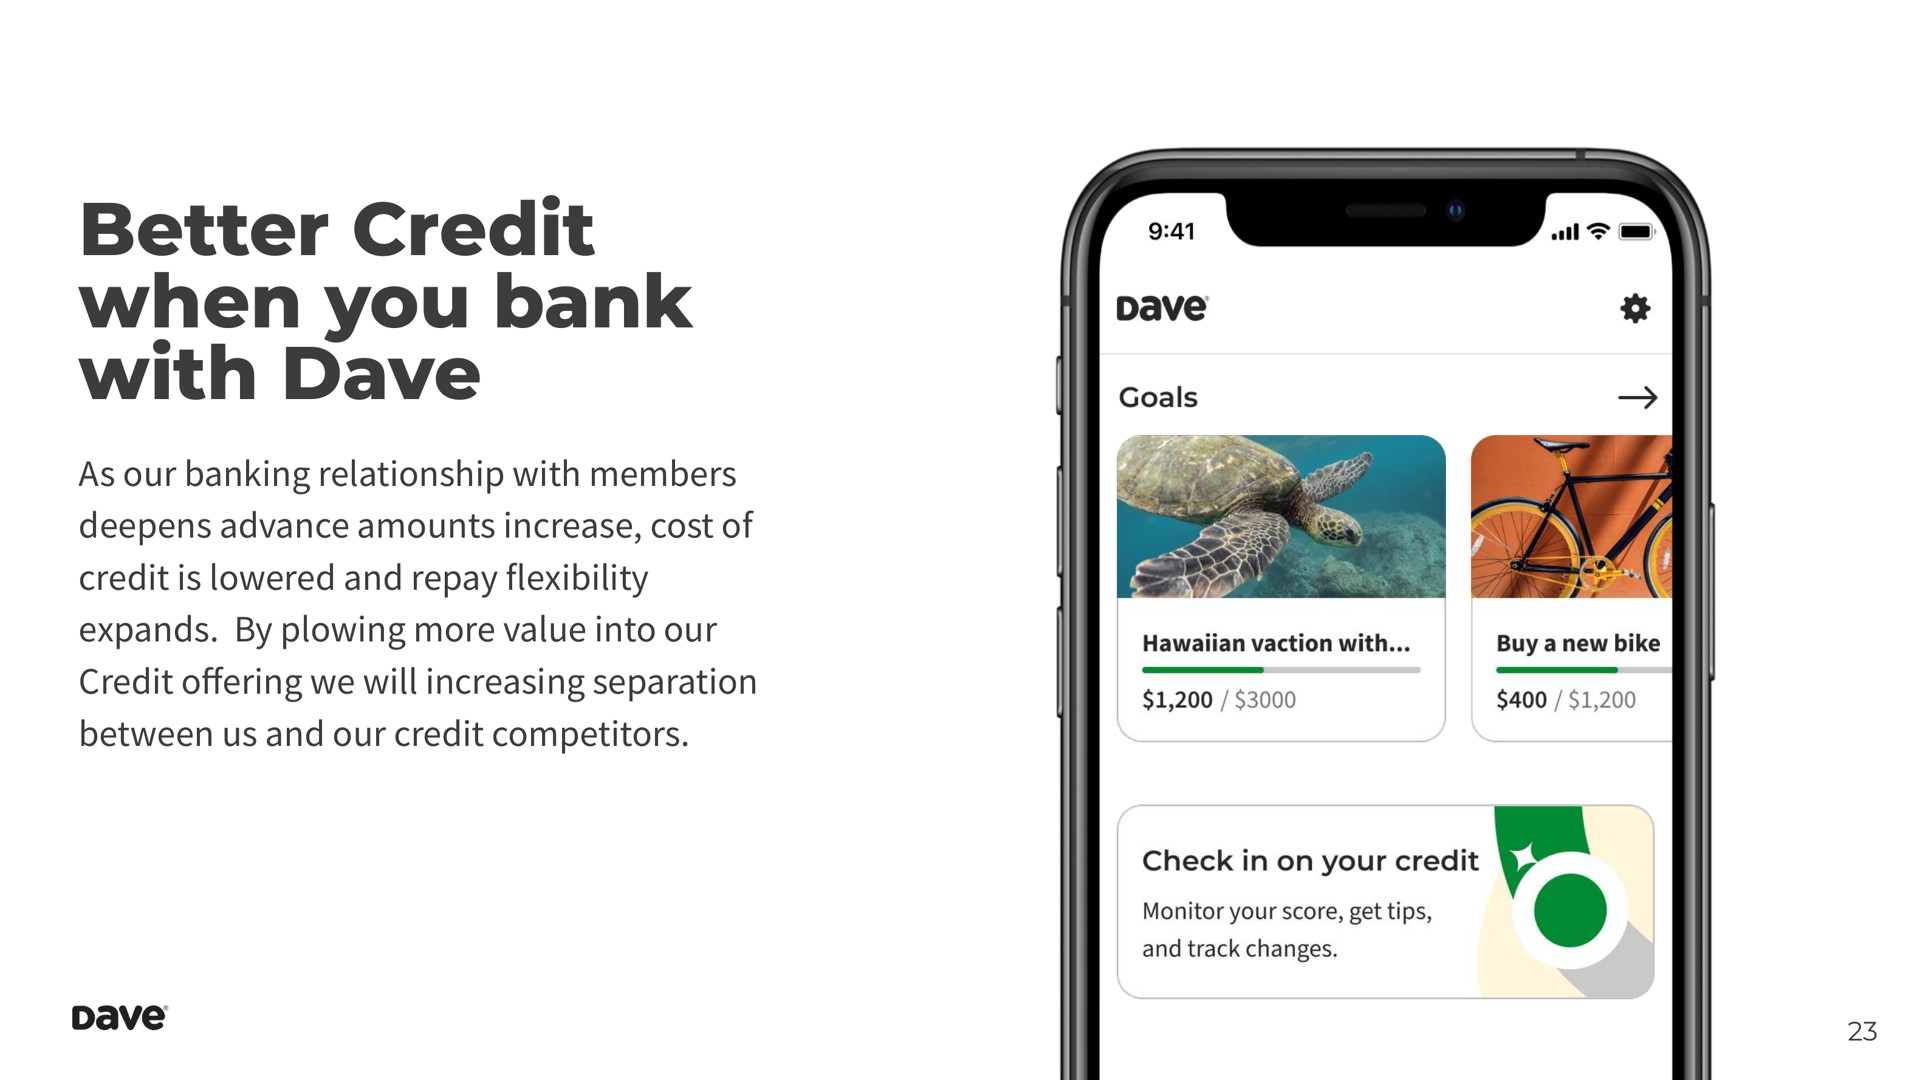 better credit when you bank with as our banking relationship with members deepens advance amounts increase cost of credit is lowered and repay flexibility expands by plowing more value into our credit we will increasing separation between us and our credit competitors | Dave